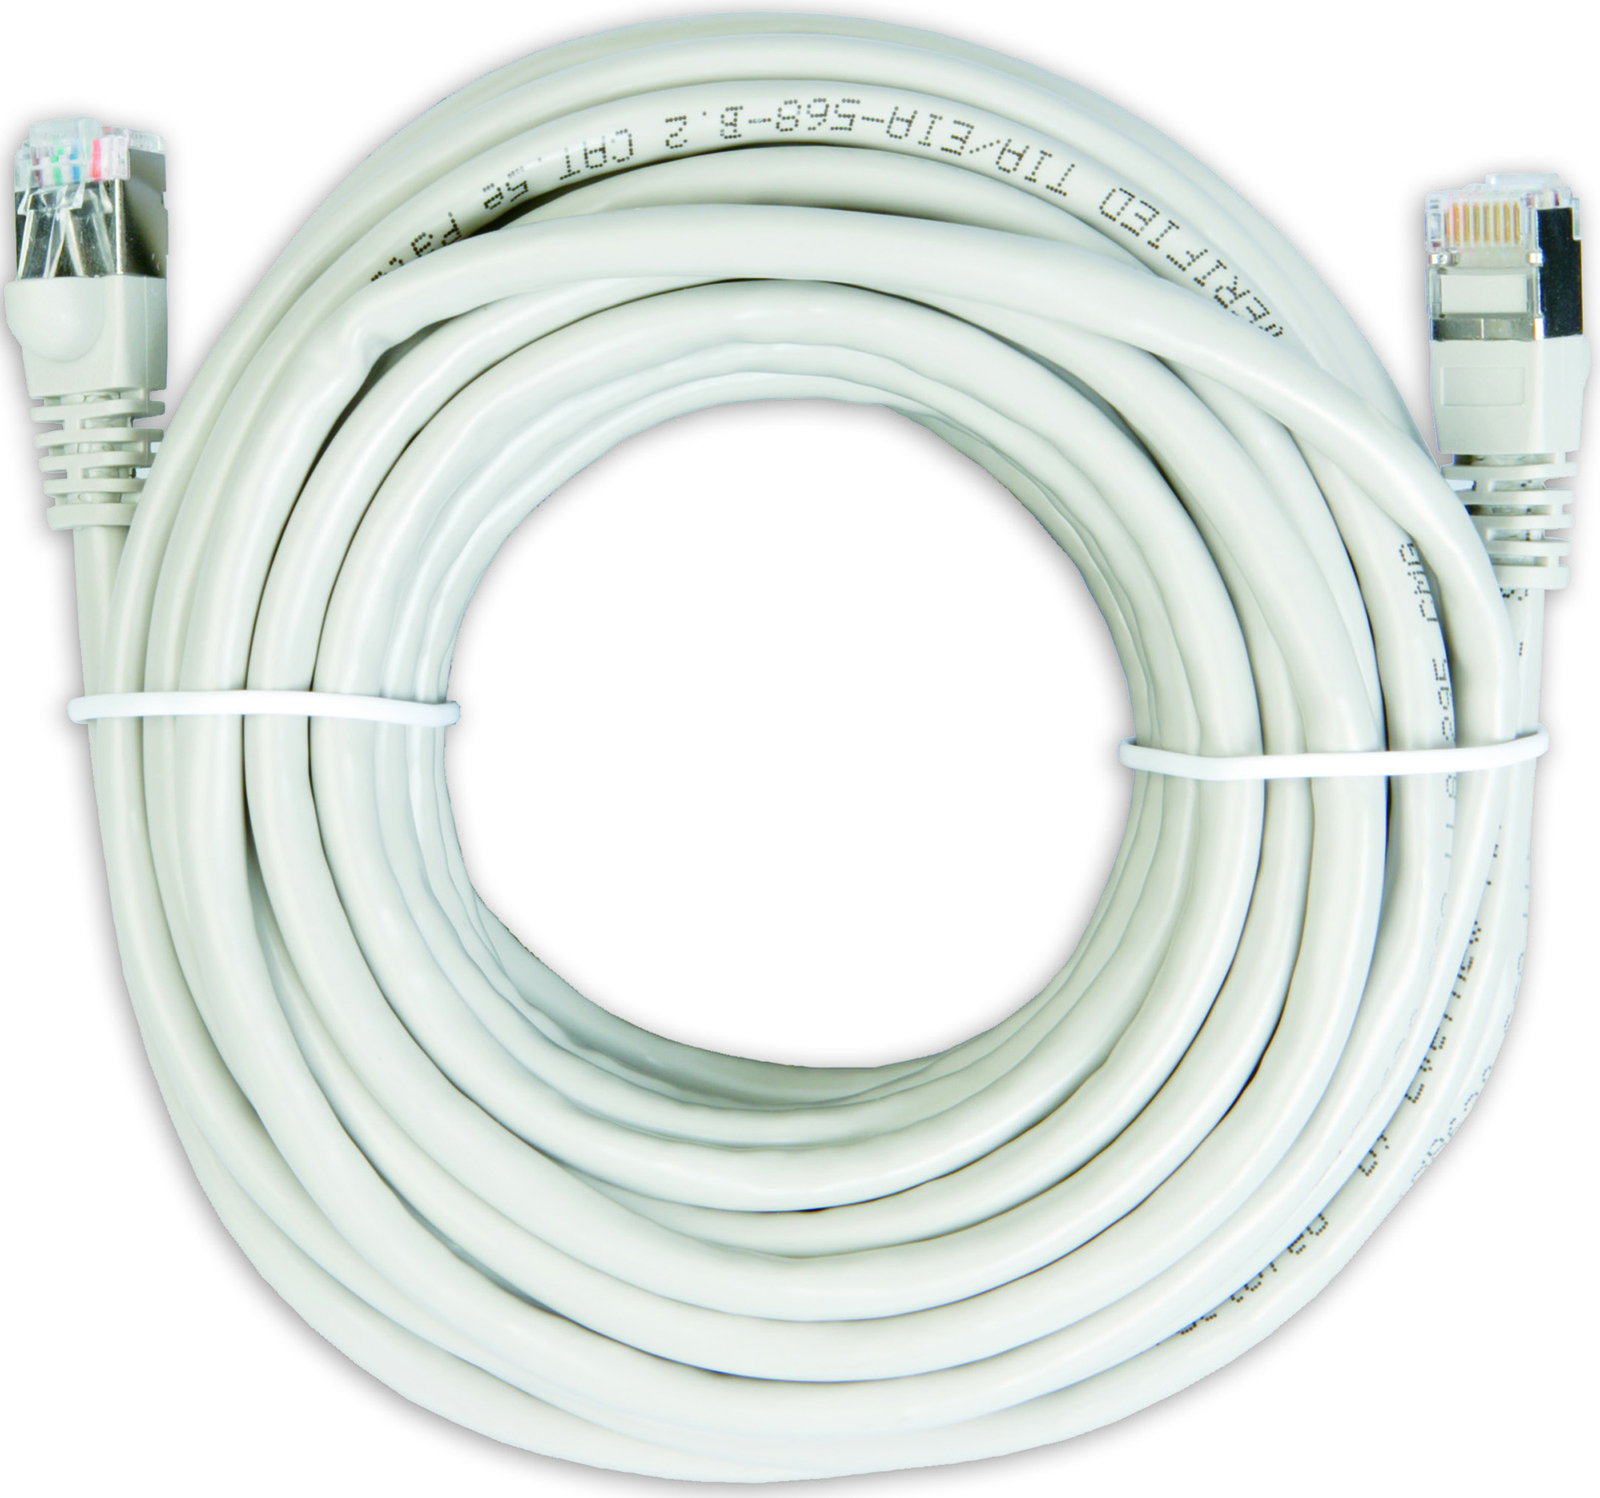 Primary image for 50' CAT5 CAT5e RJ45 PATCH ETHERNET NETWORK CABLE